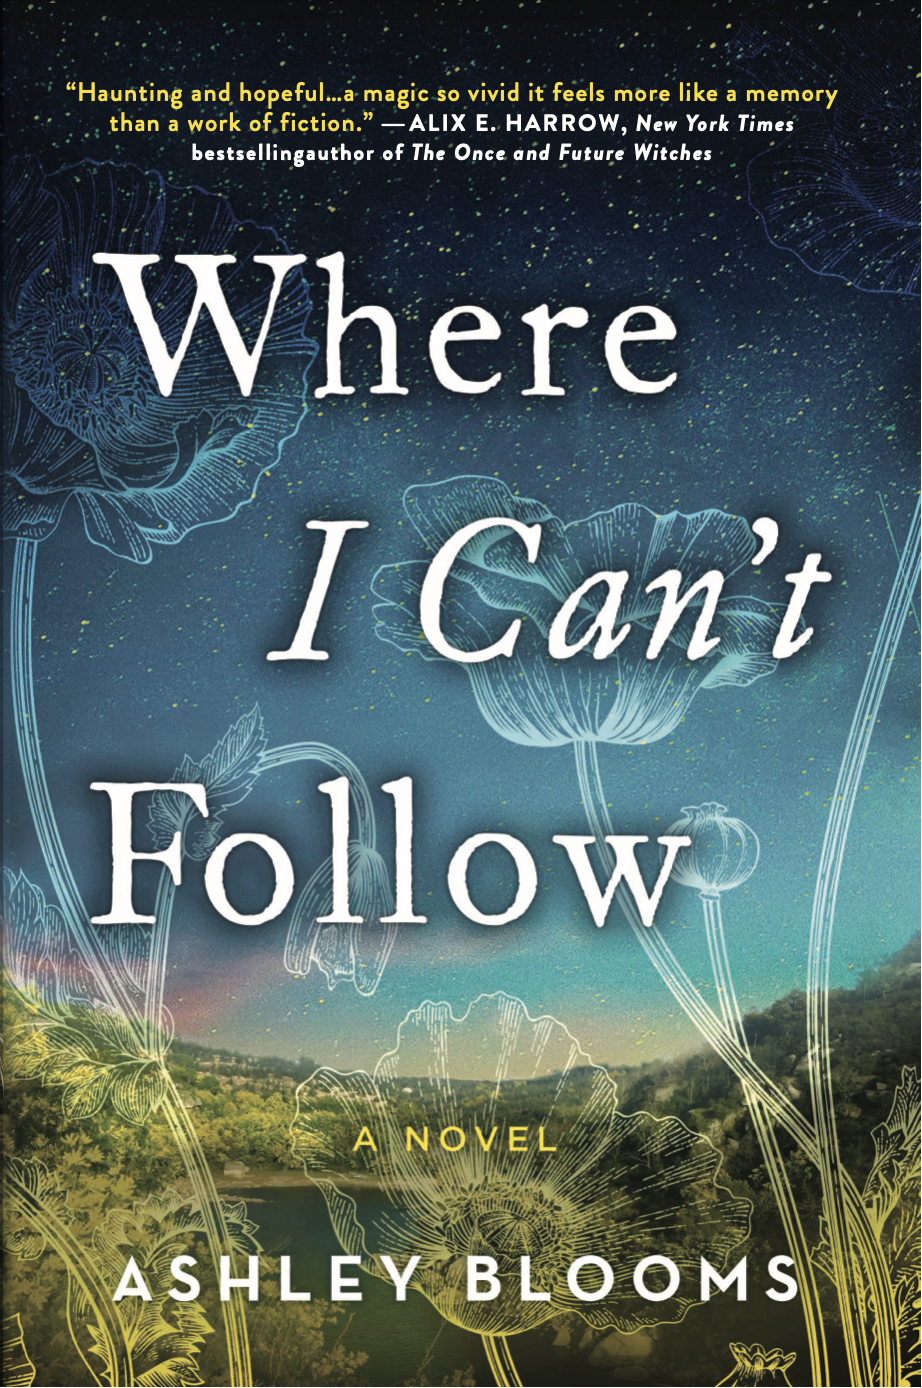 Where I Can't Follow by Ashley Blooms